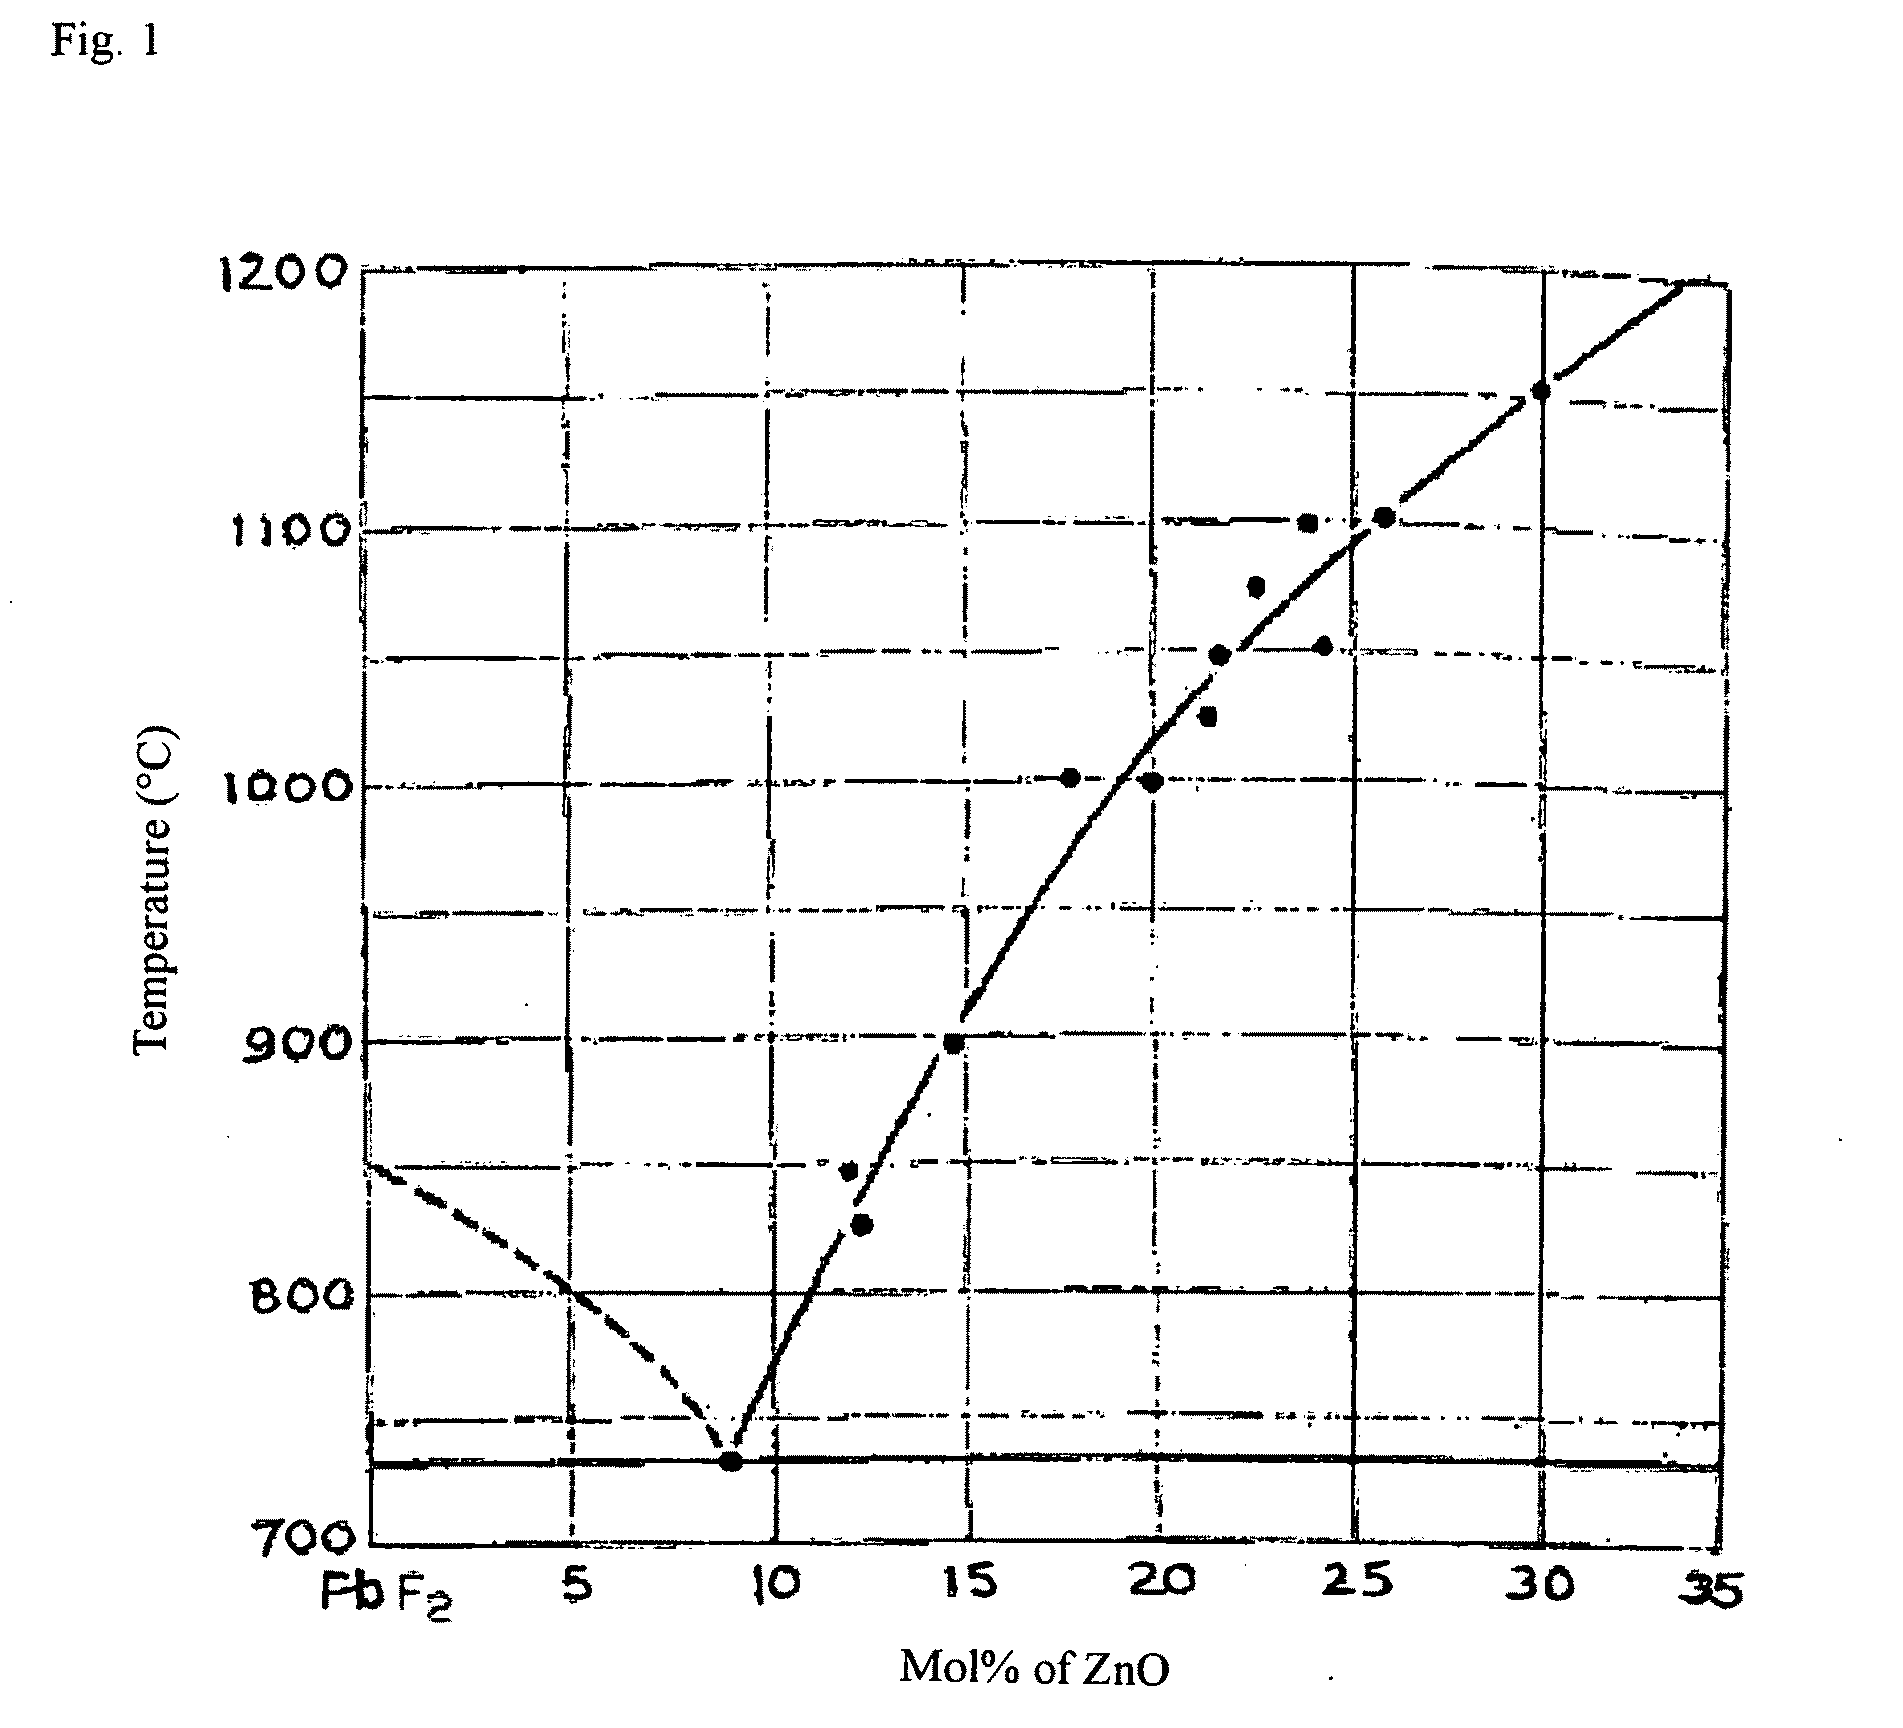 Process for Producing Zno Single Crystal According to Method of Liquid Phase Growth